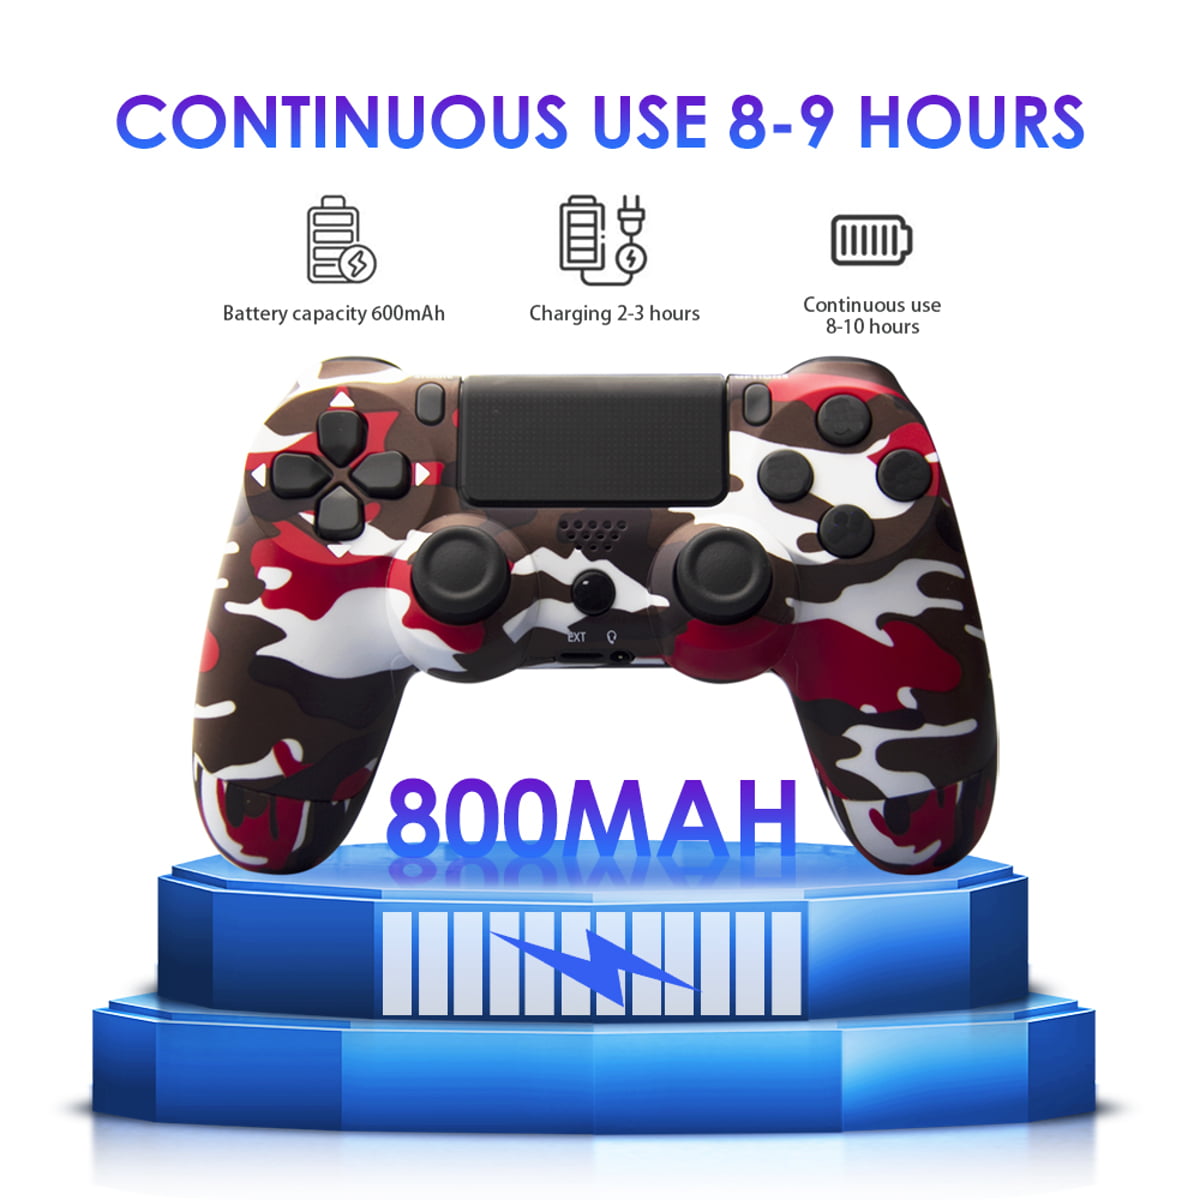 Min leksikon suffix Ps4 Controller Compatible With Playstation 4 Console - Camo Red -  Walmart.com